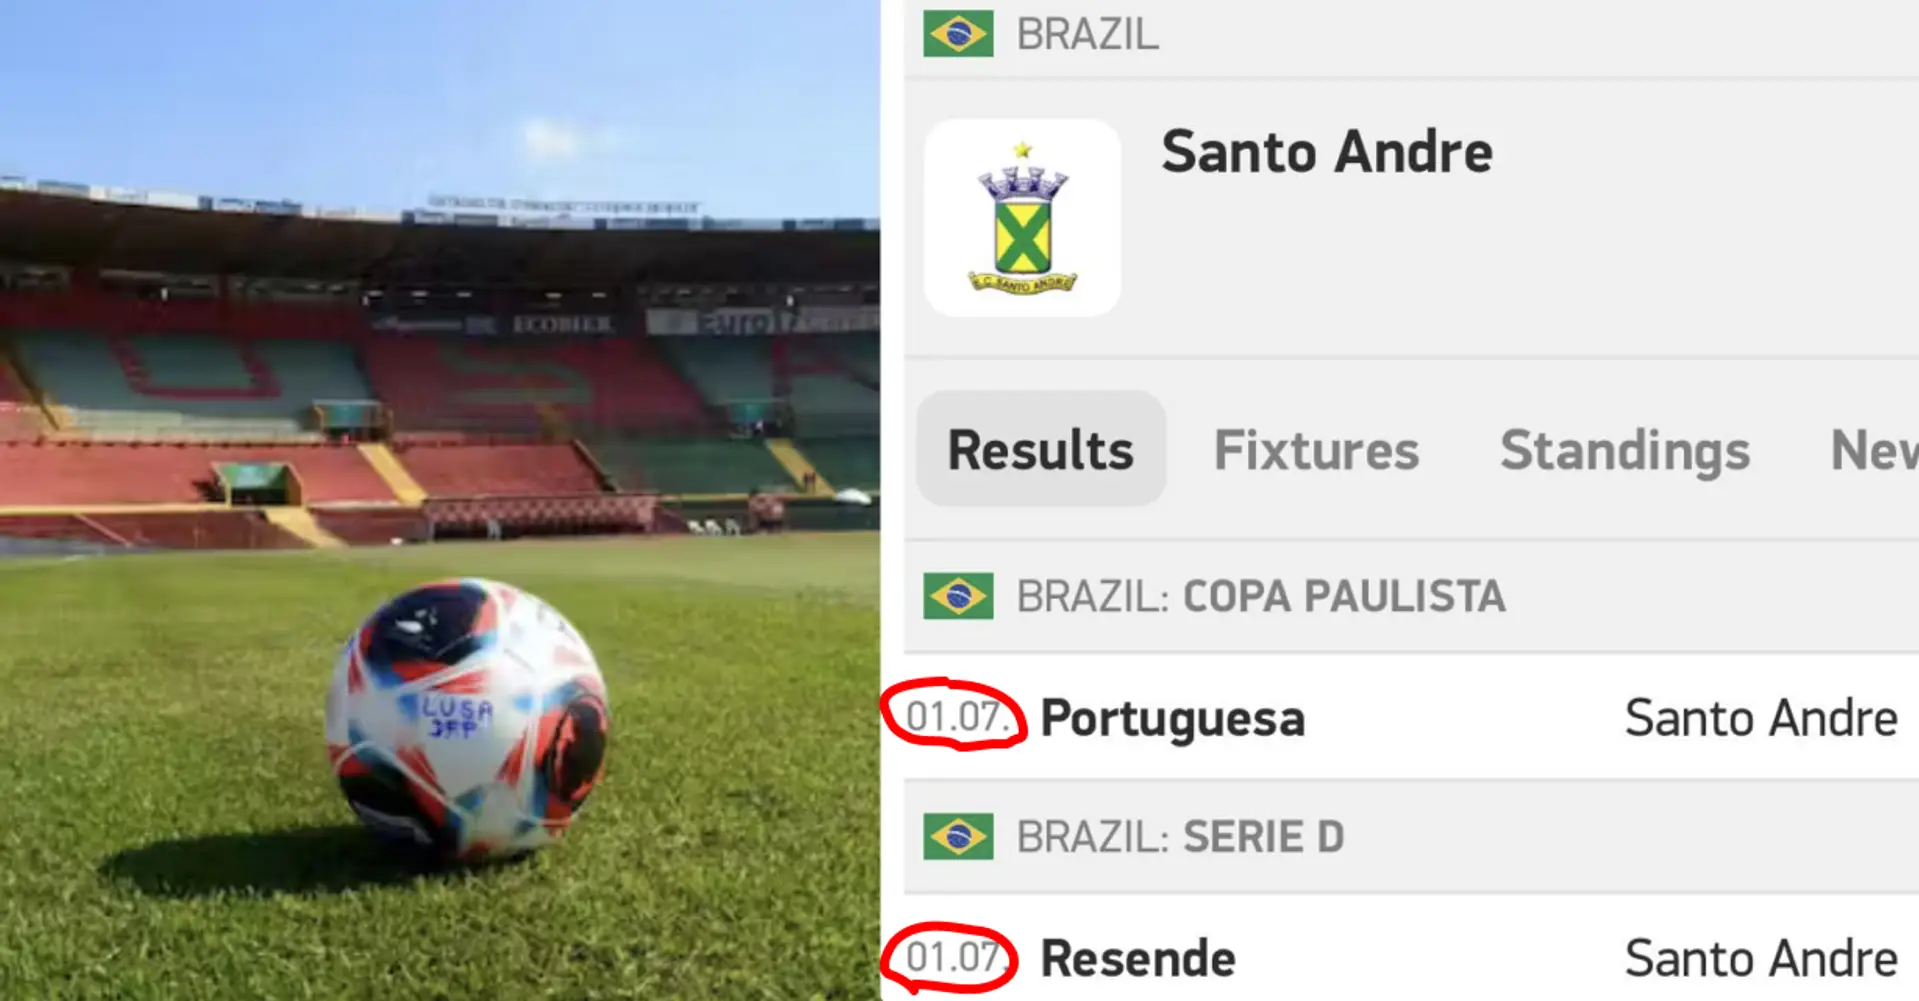 Brazilian club plays two different matches at the same time, loses both